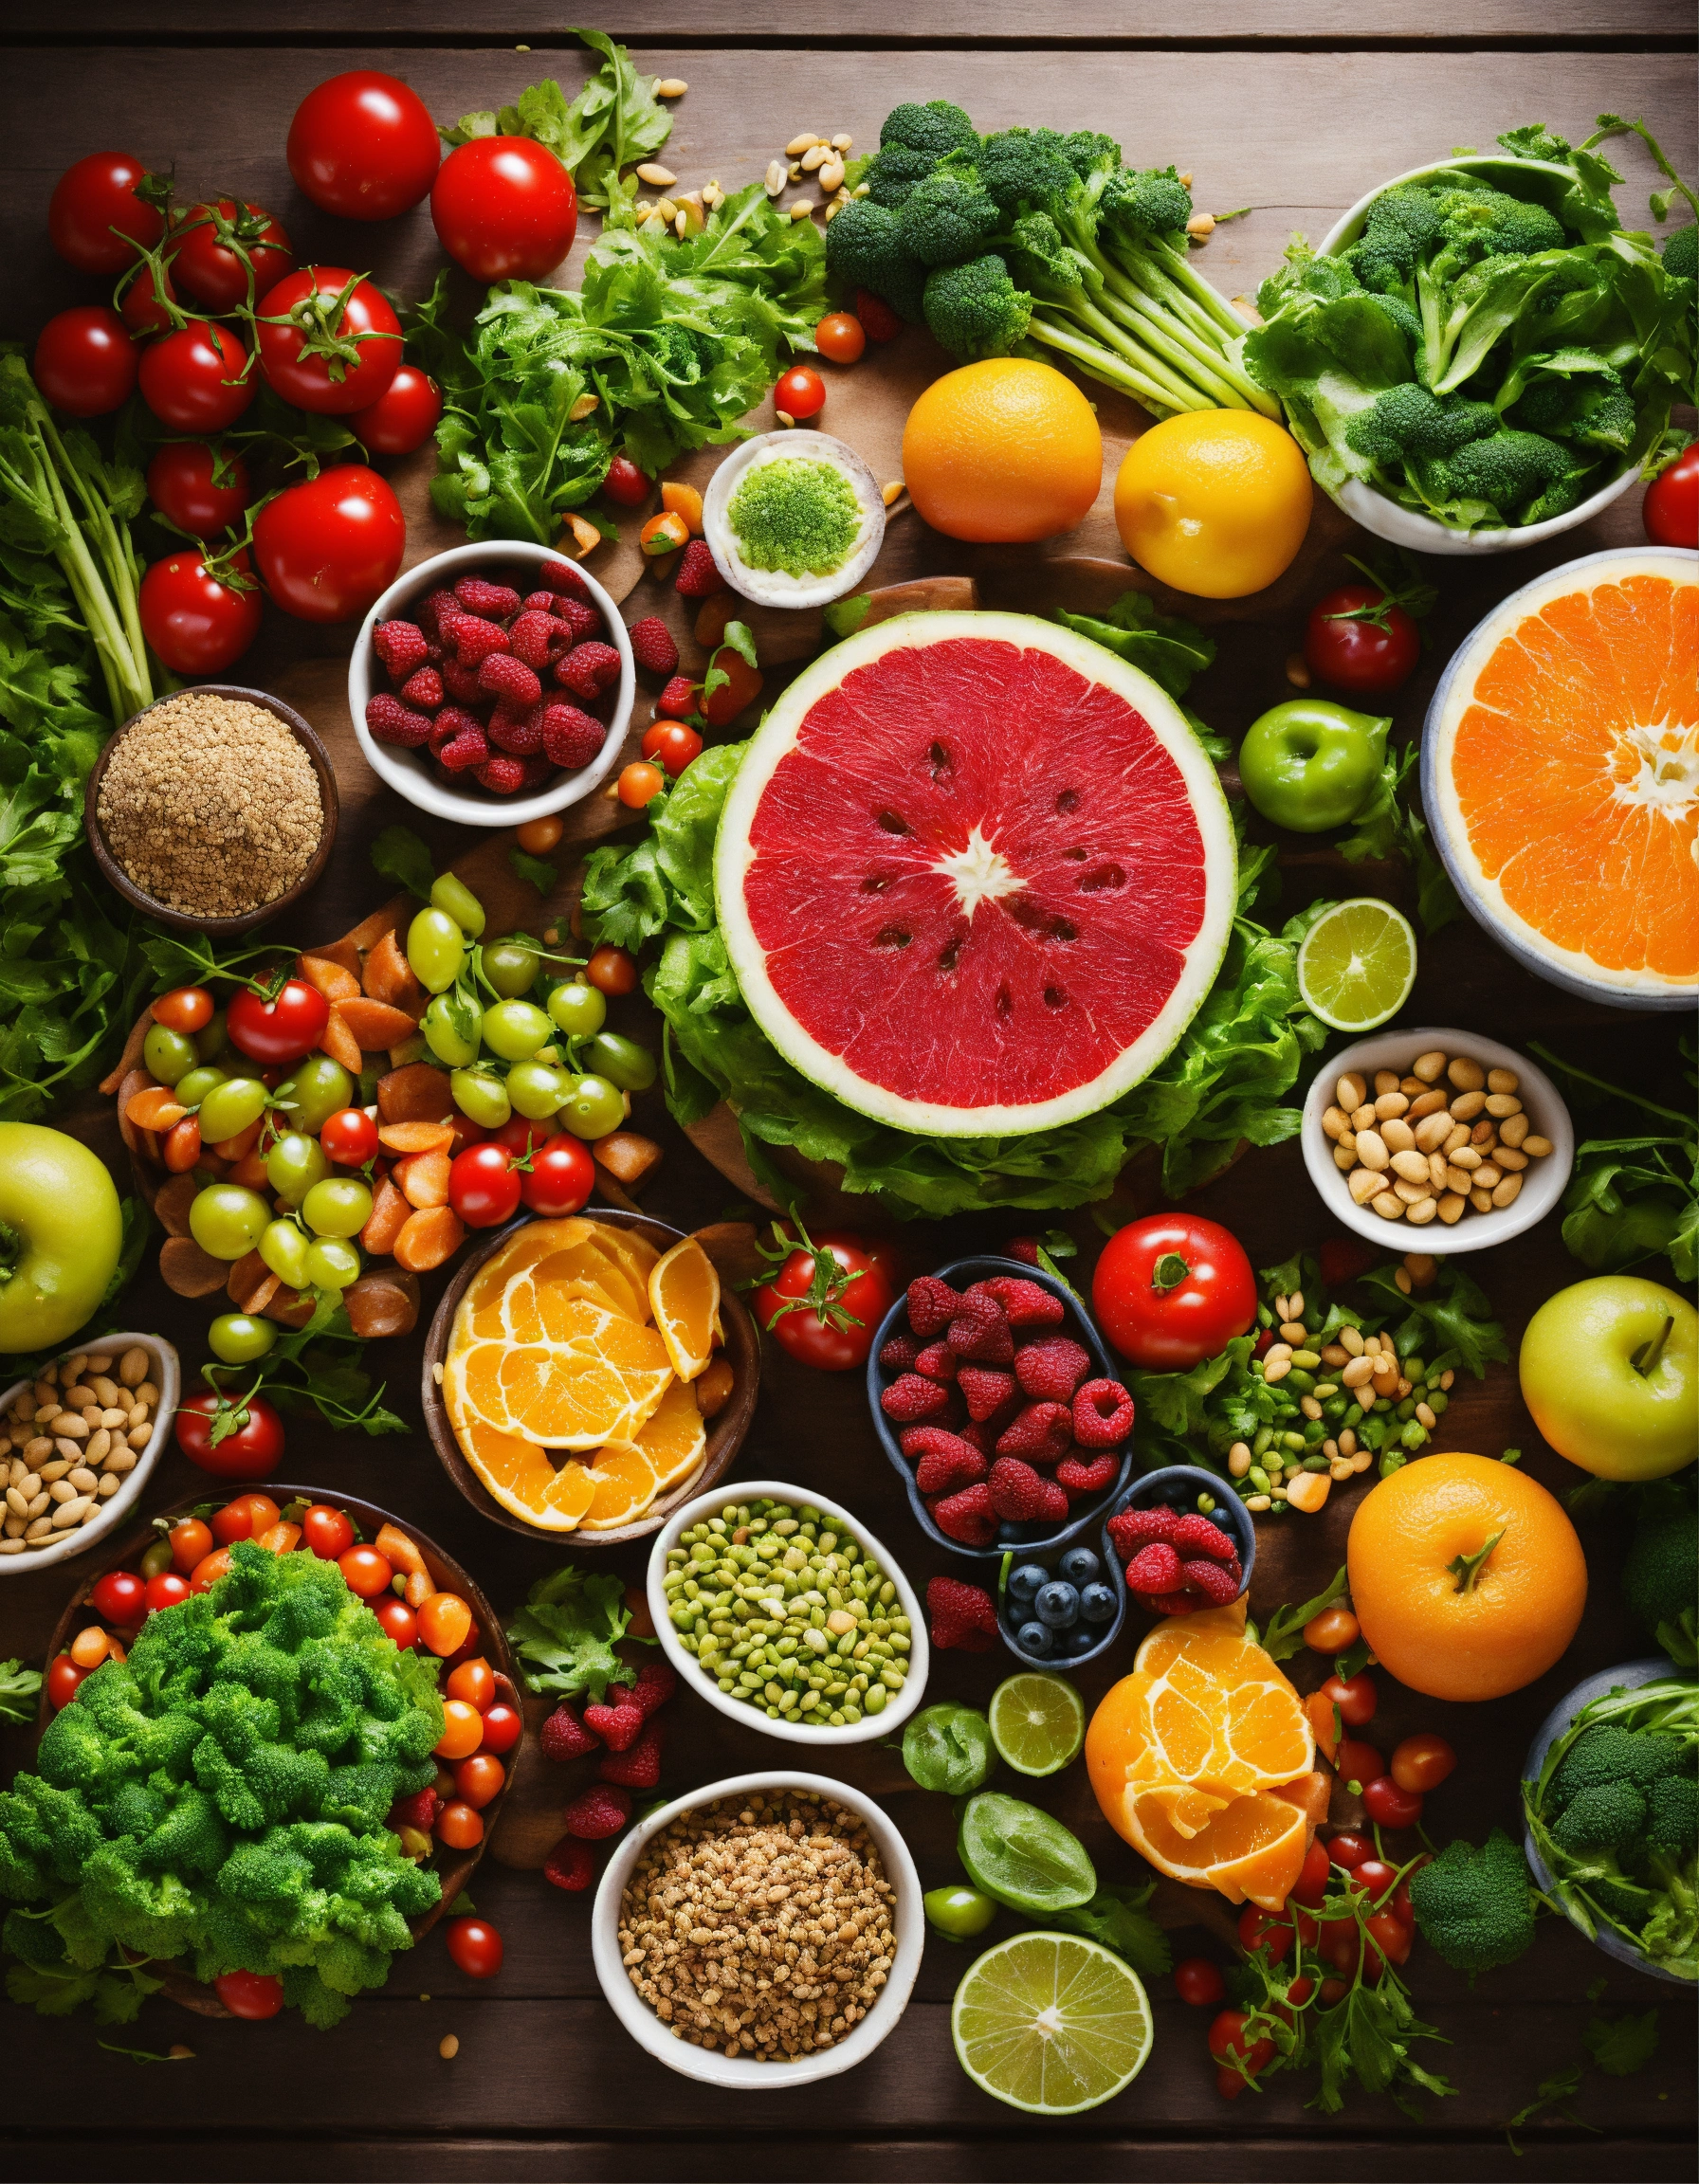 Vegetarian and Vegan Nutrition: What You Need to Know to Get the Most Out of Your Diet